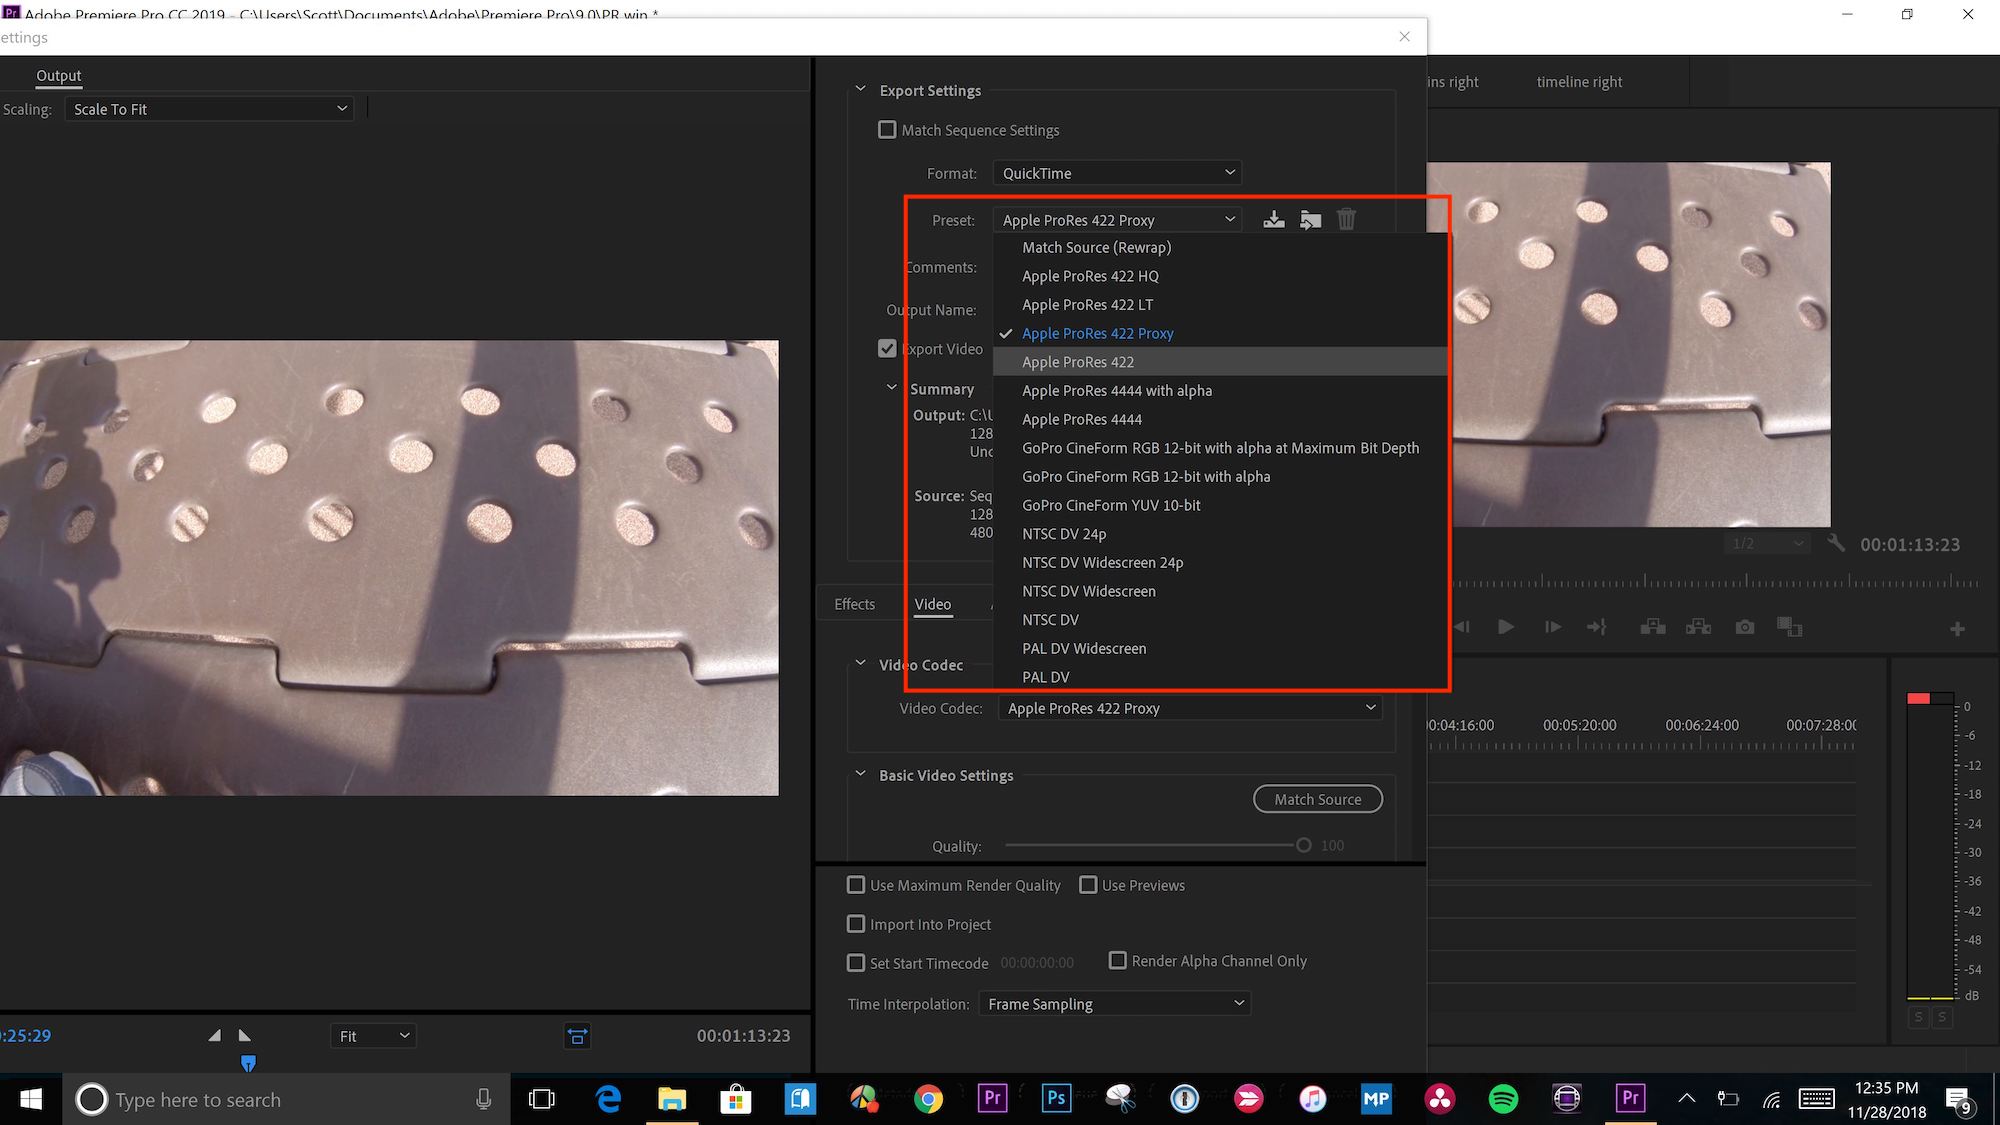 Adobe adds ProRes export support on Windows in the latest release 12